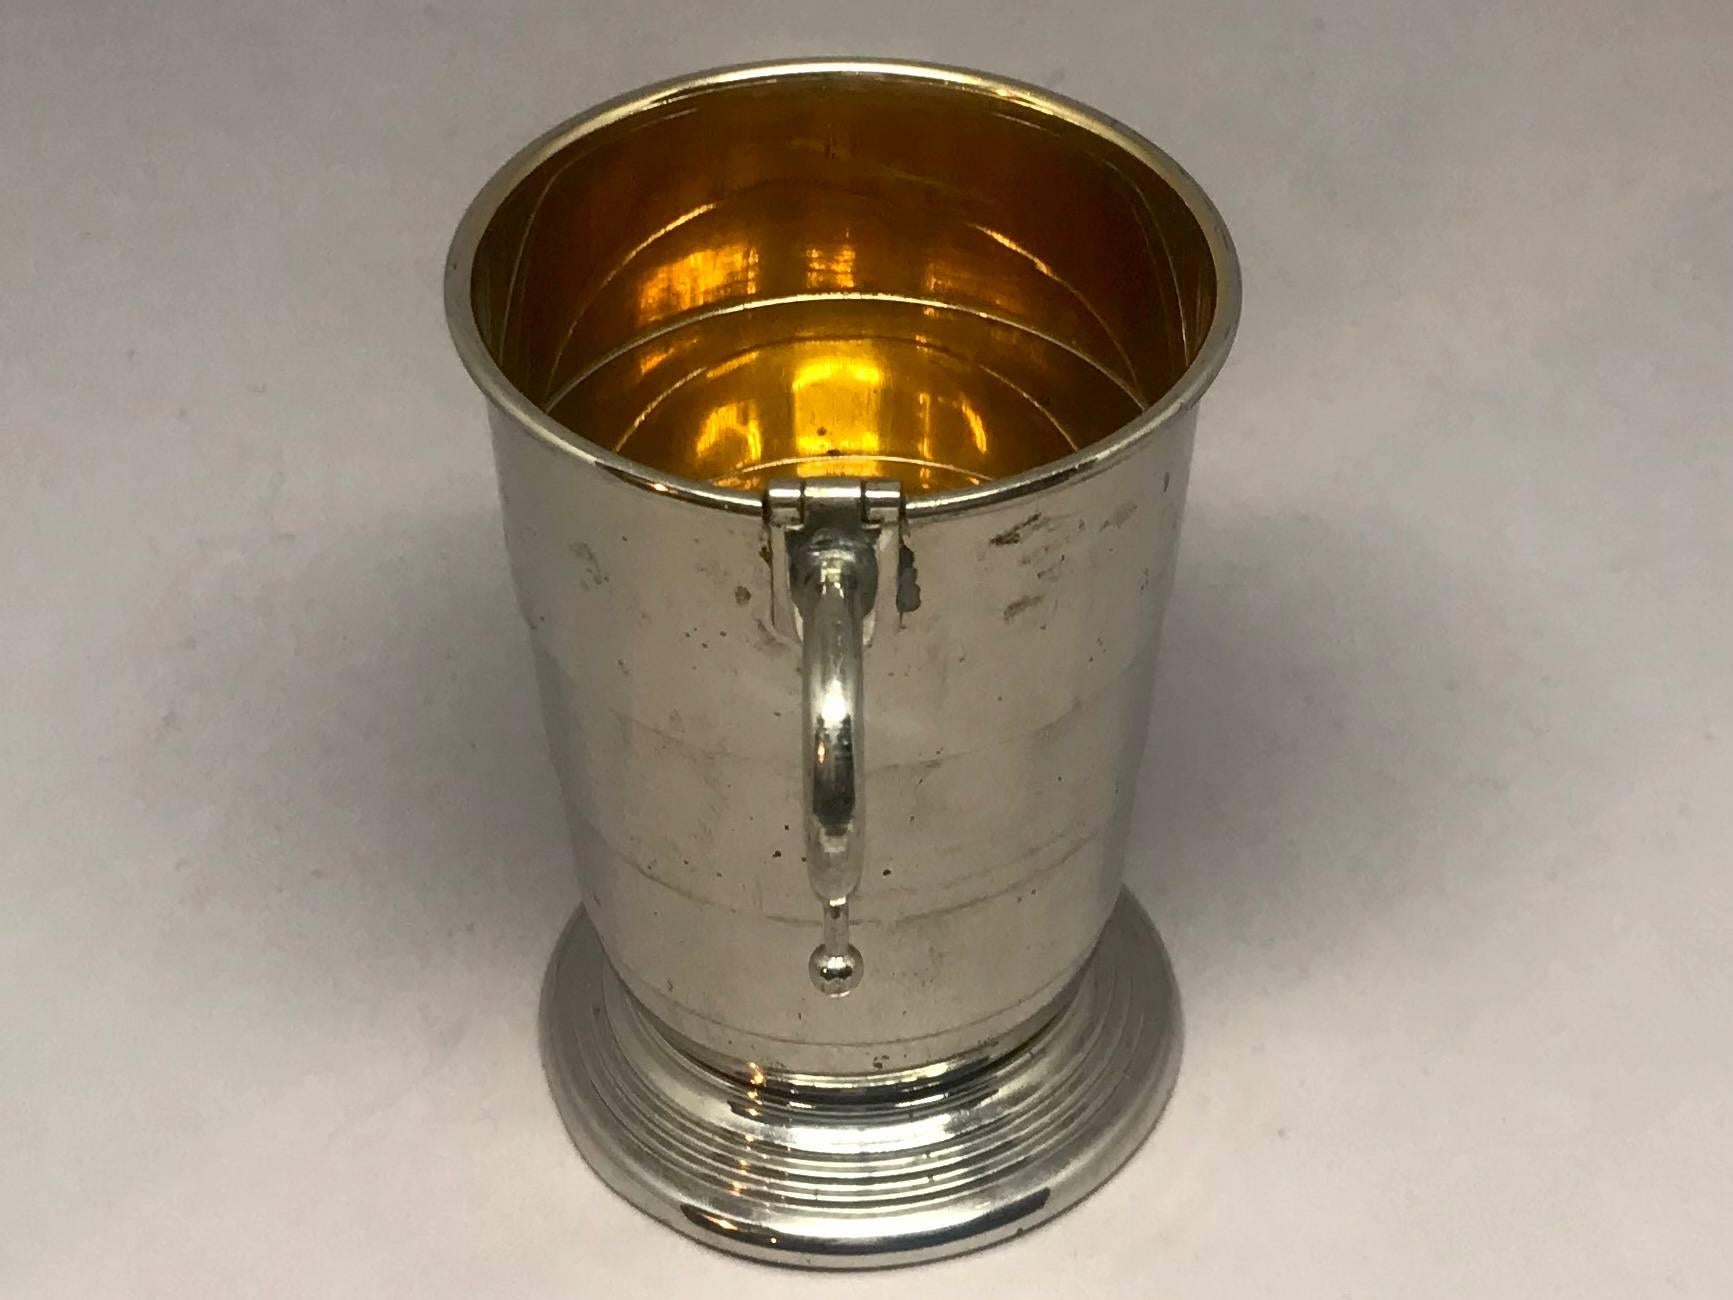 Collapsible German silver and vermeil cup. Chic camping cup: vintage silver plated and vermeil washed interior campaign cup of ingenious collapsible design with operable hinged handle, retailed by Mark Cross London, Germany, circa 1910.
Dimensions: